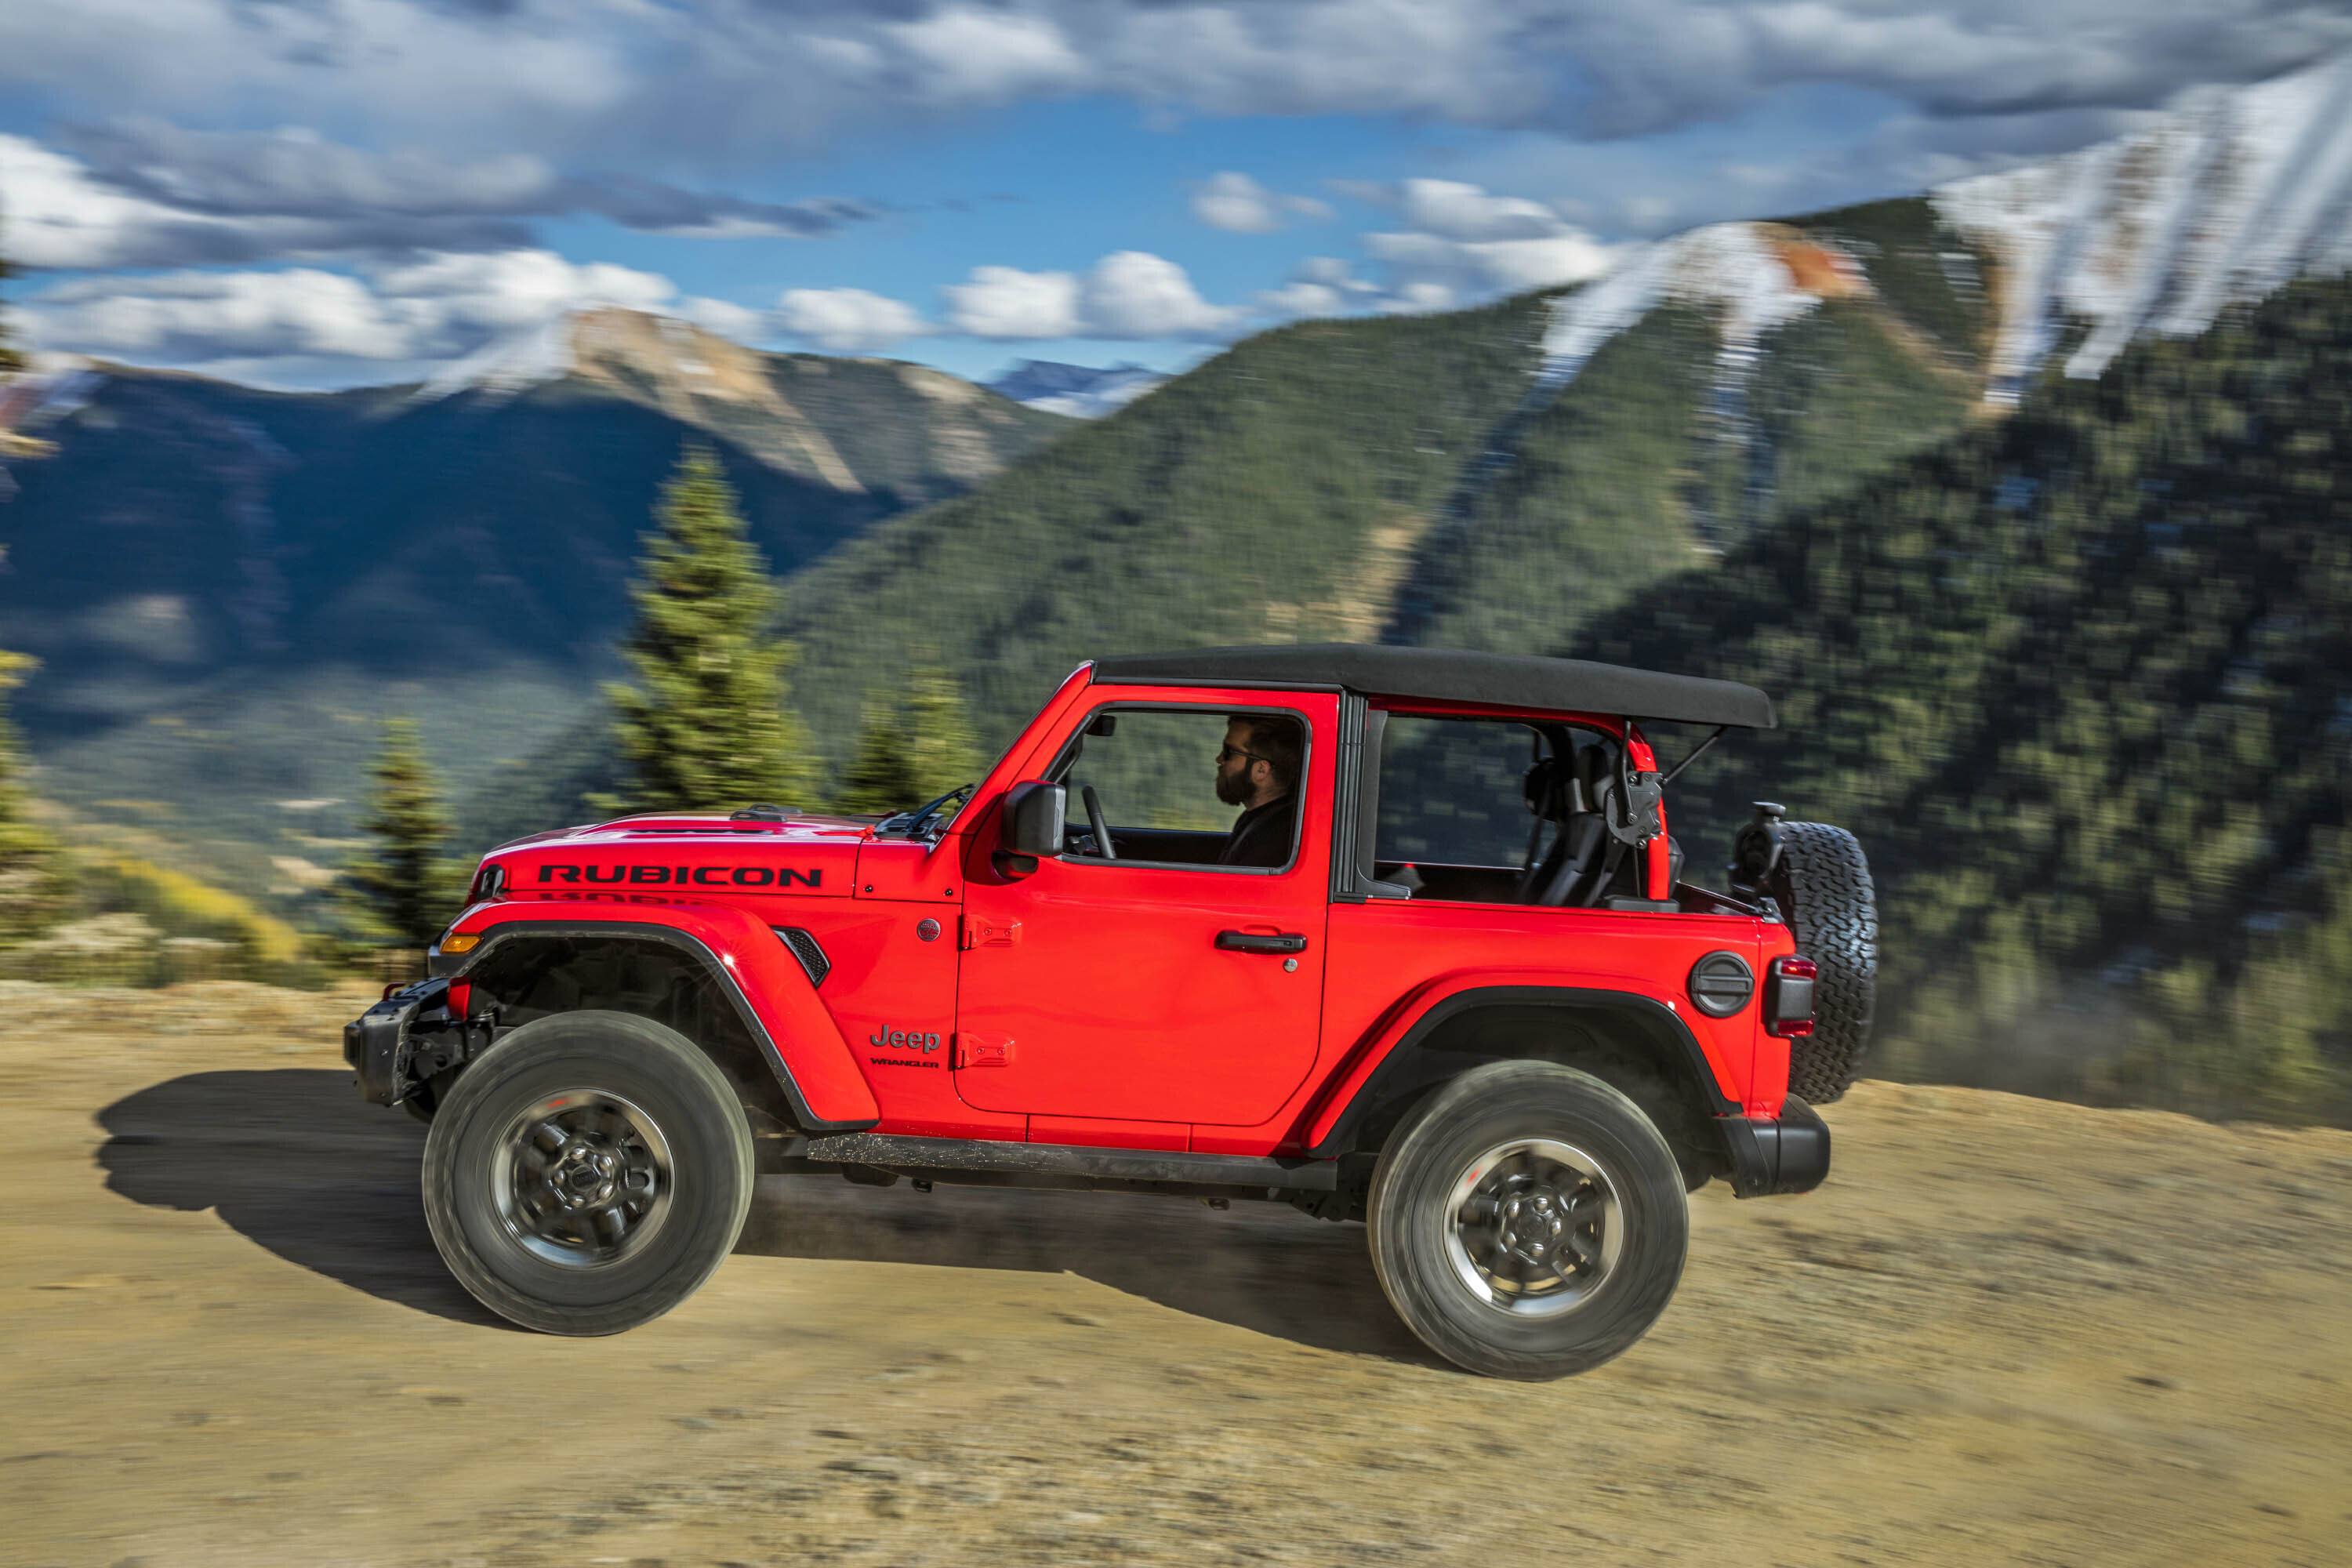 Jeep goes green with arrival of the 2021 Jeep Wrangler 4xe plug-in hybrid